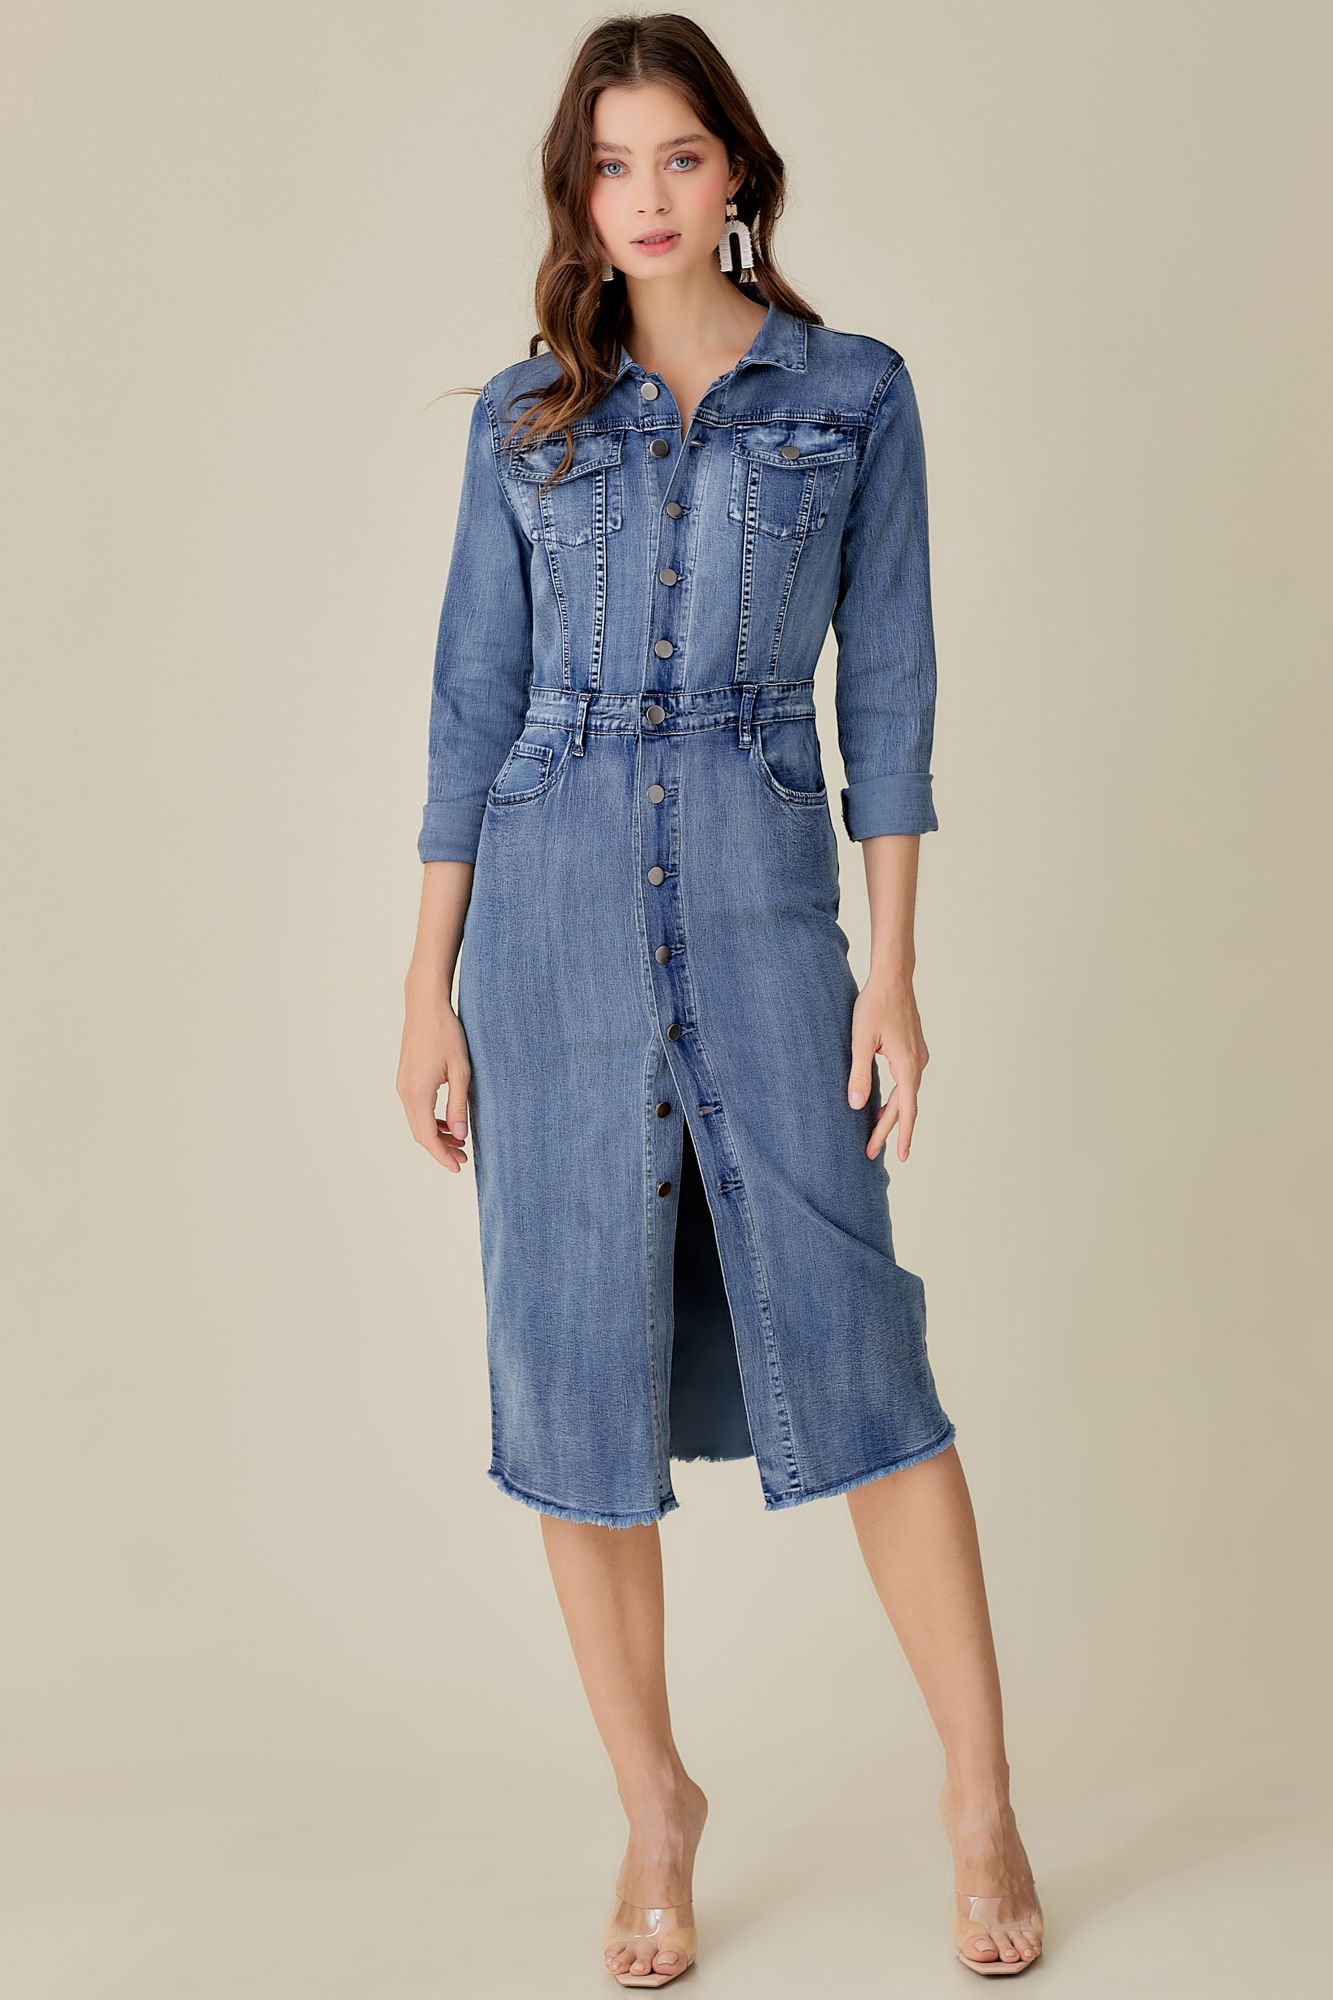 Upgrade Your Look with Oversized Denim Dress - Nolabels.in